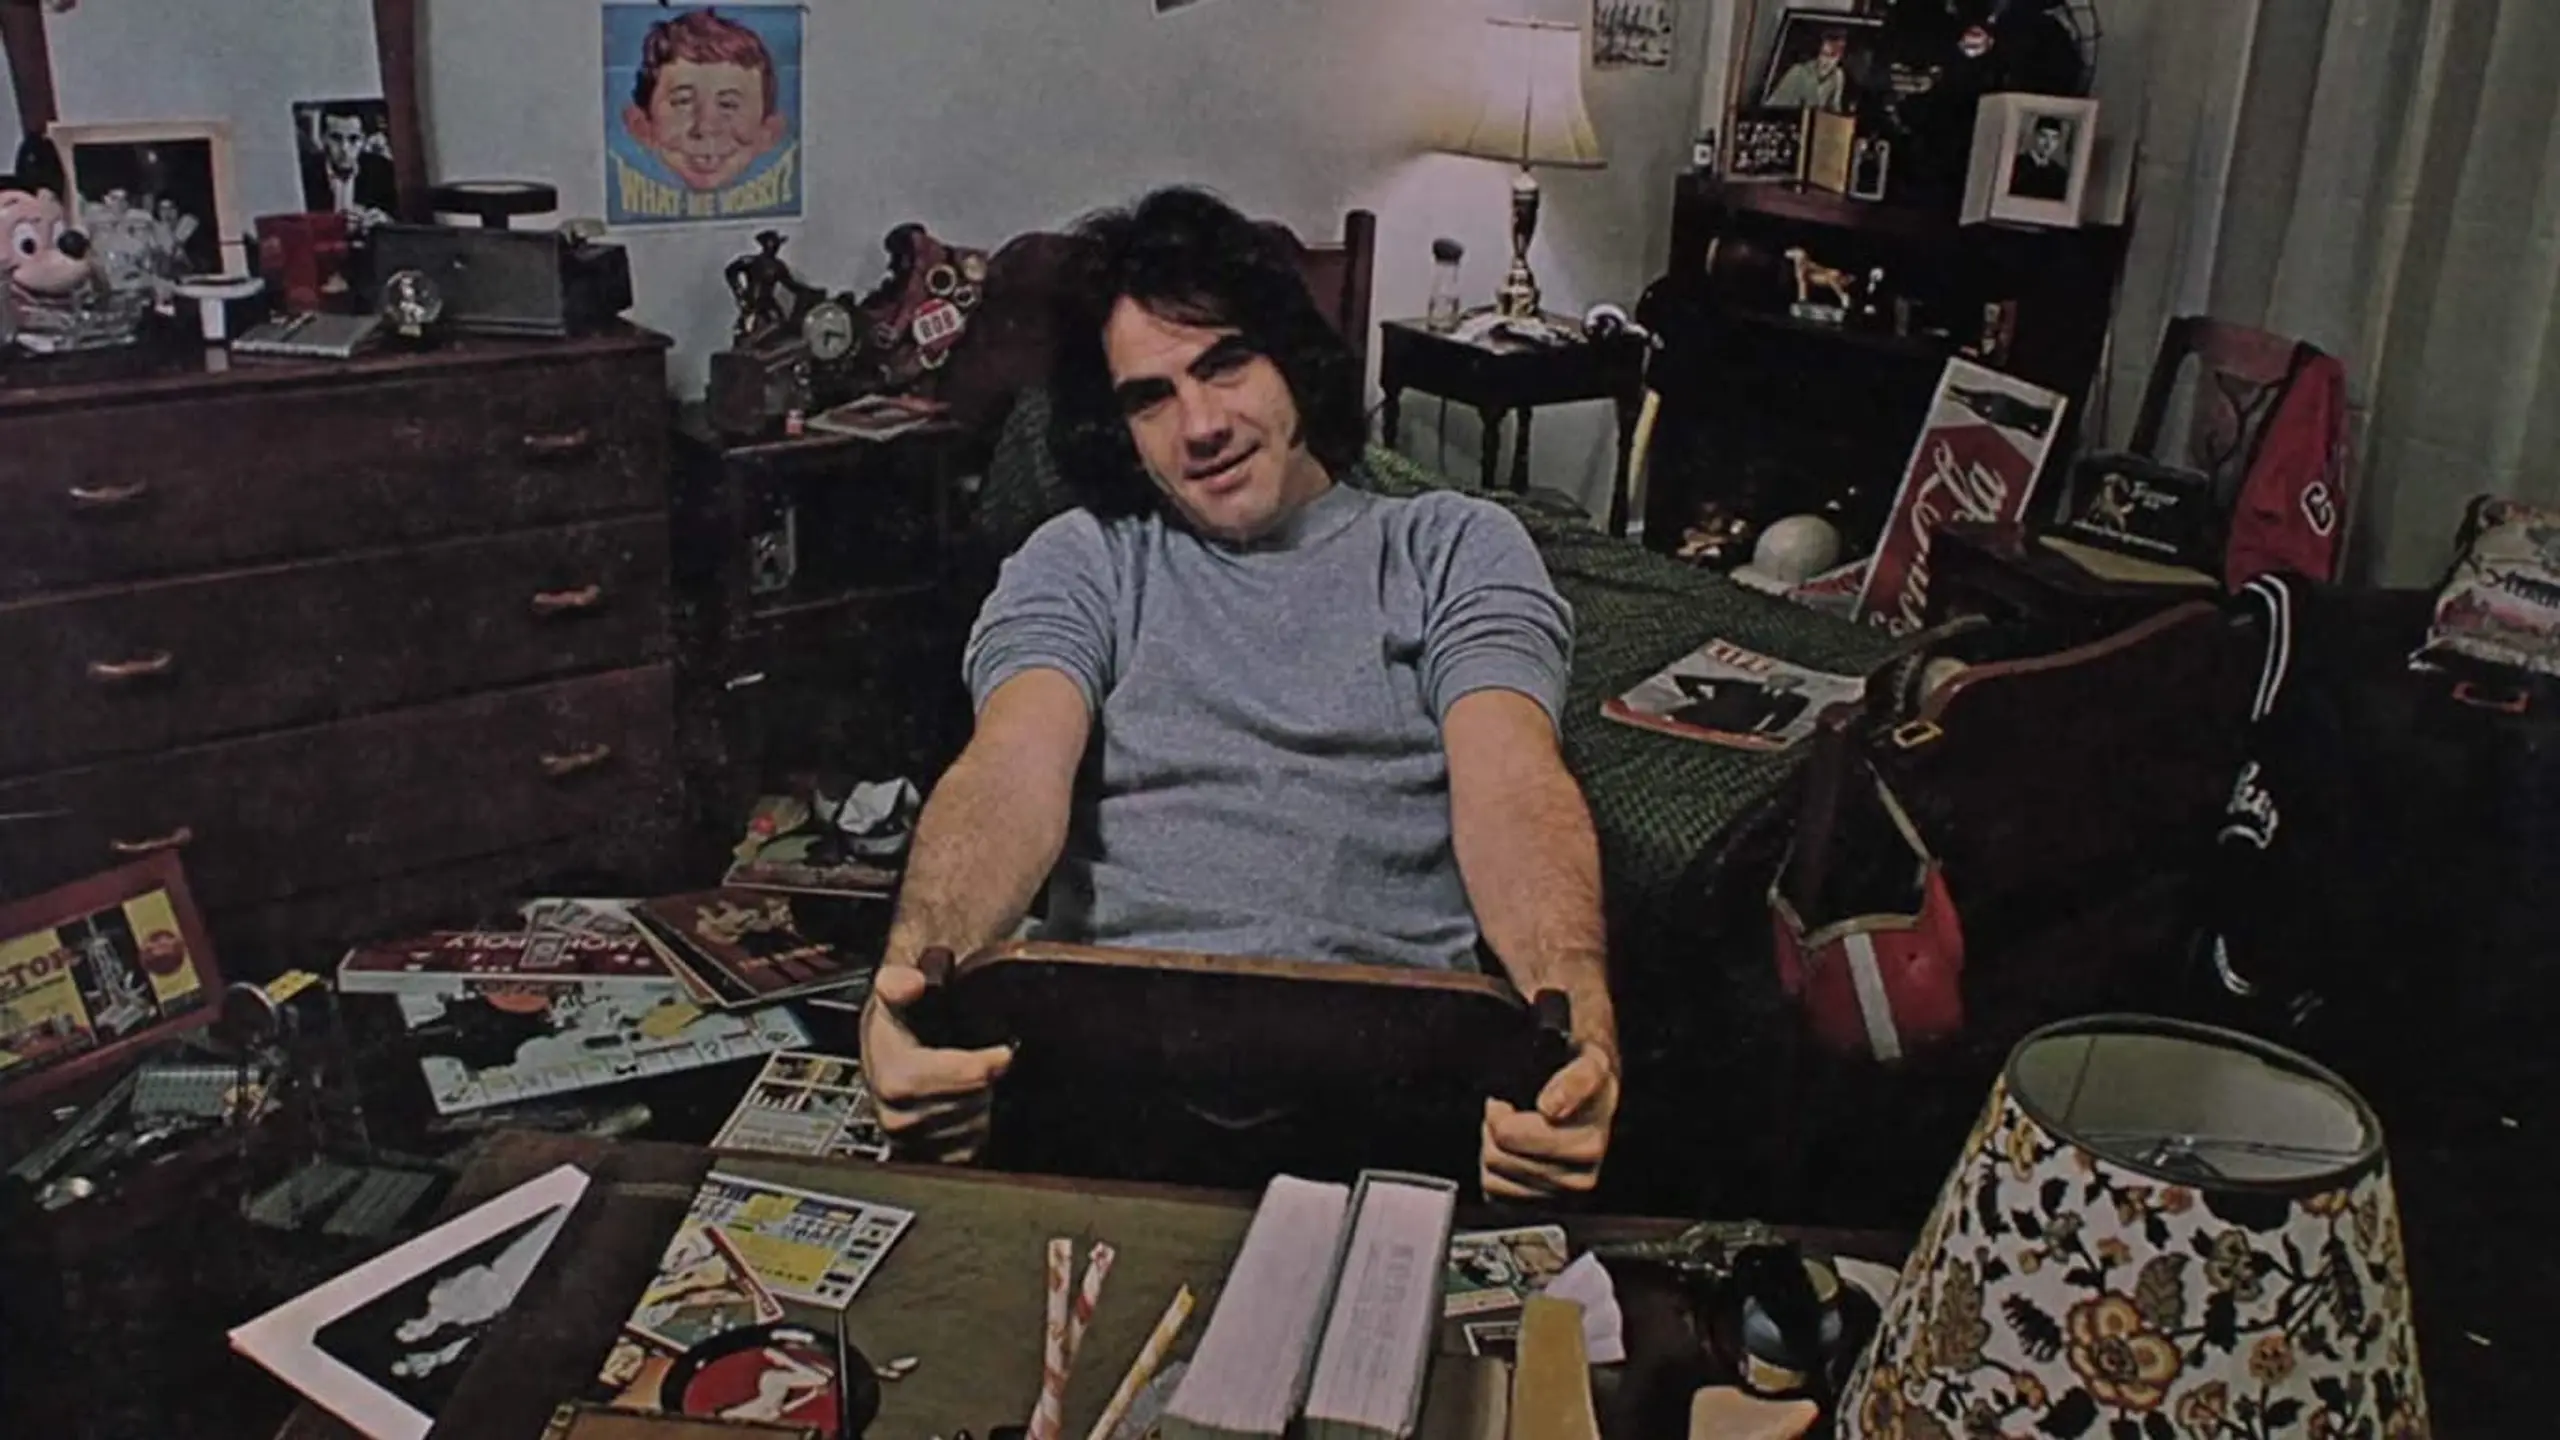 Robert Klein: Child of the 50's, Man of the 80's